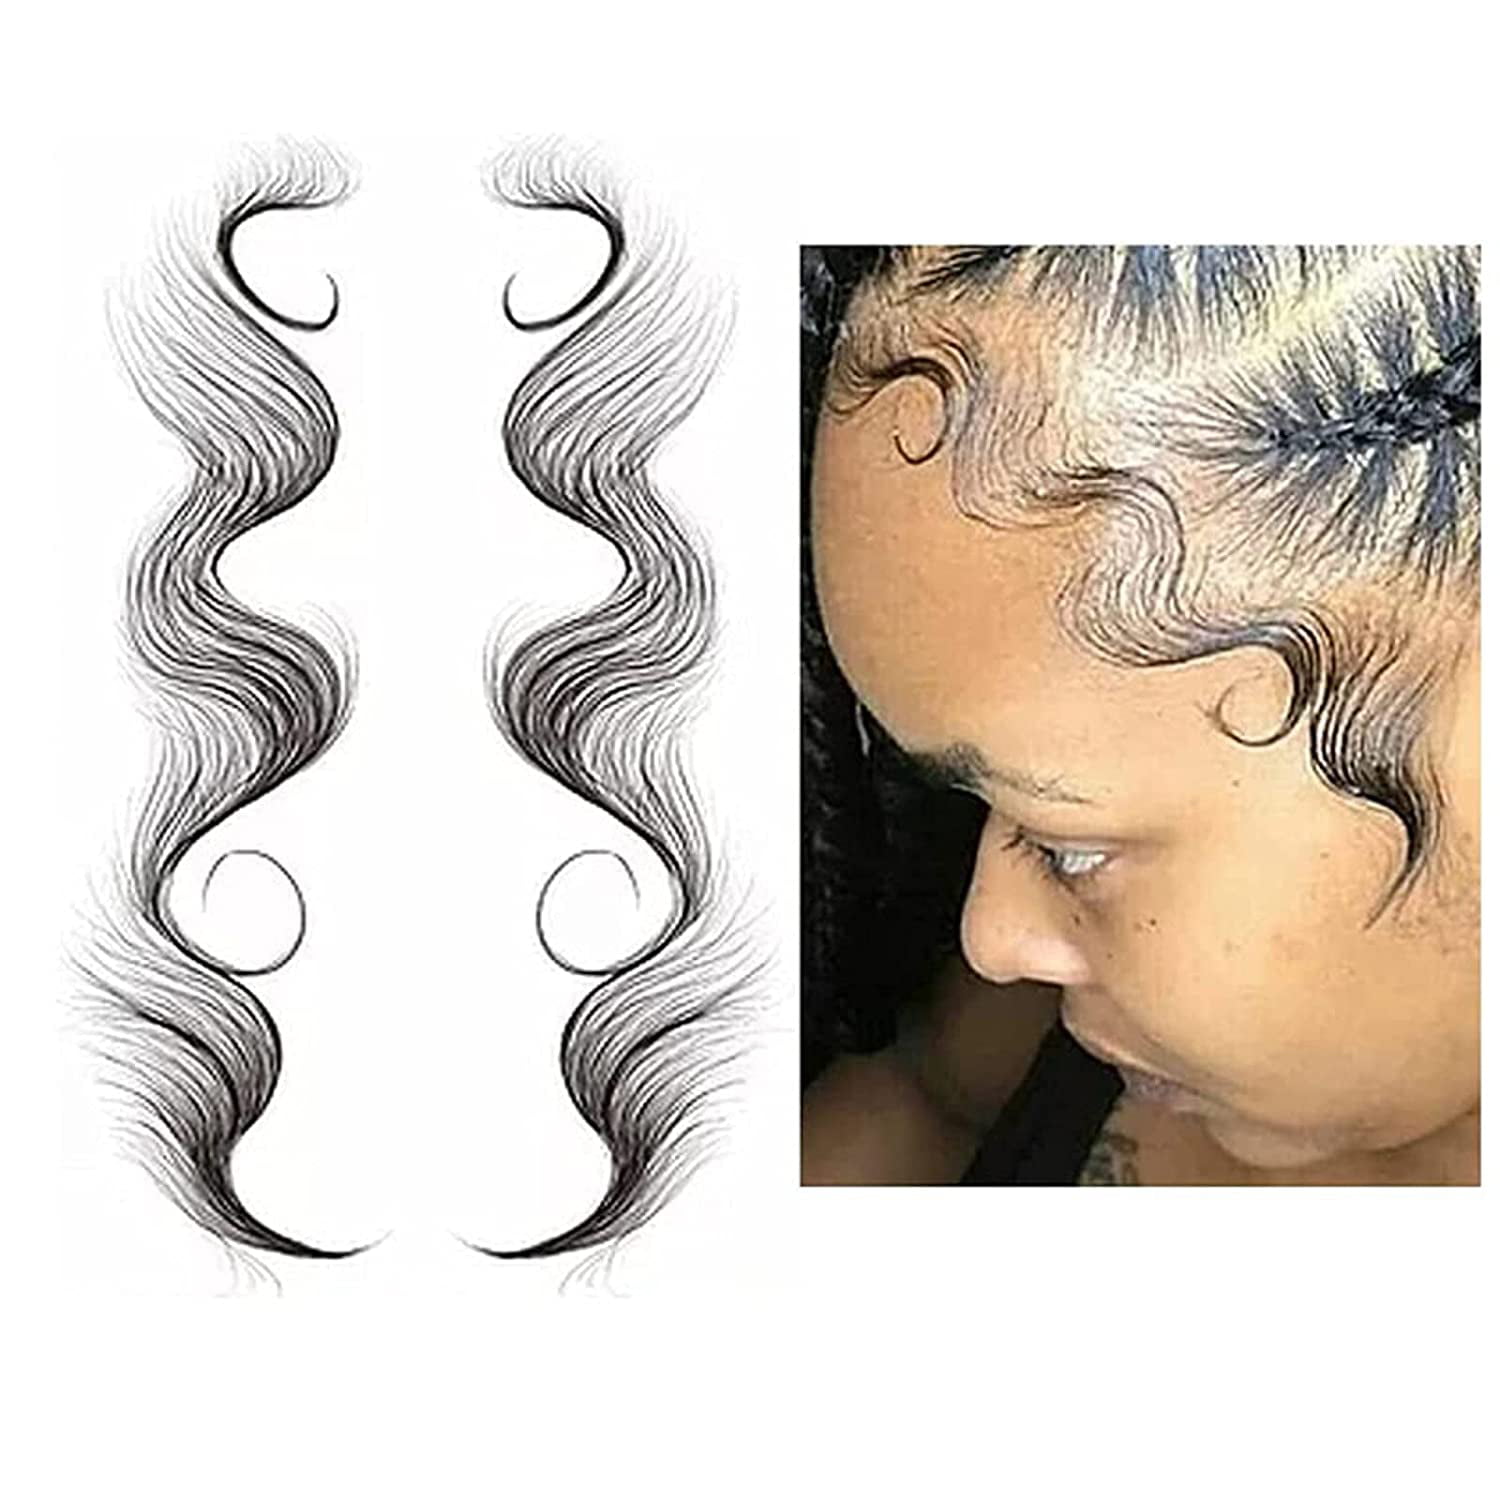 Baby Hair Tattoo Stickers Temporary Tattoo Baby Hair Waterproof Edge Tattoo Edges Curly Hair DIY Hairstyling Hair Tattooing Template Hair Stickers Lasting Makeup Tool - Walmart.com